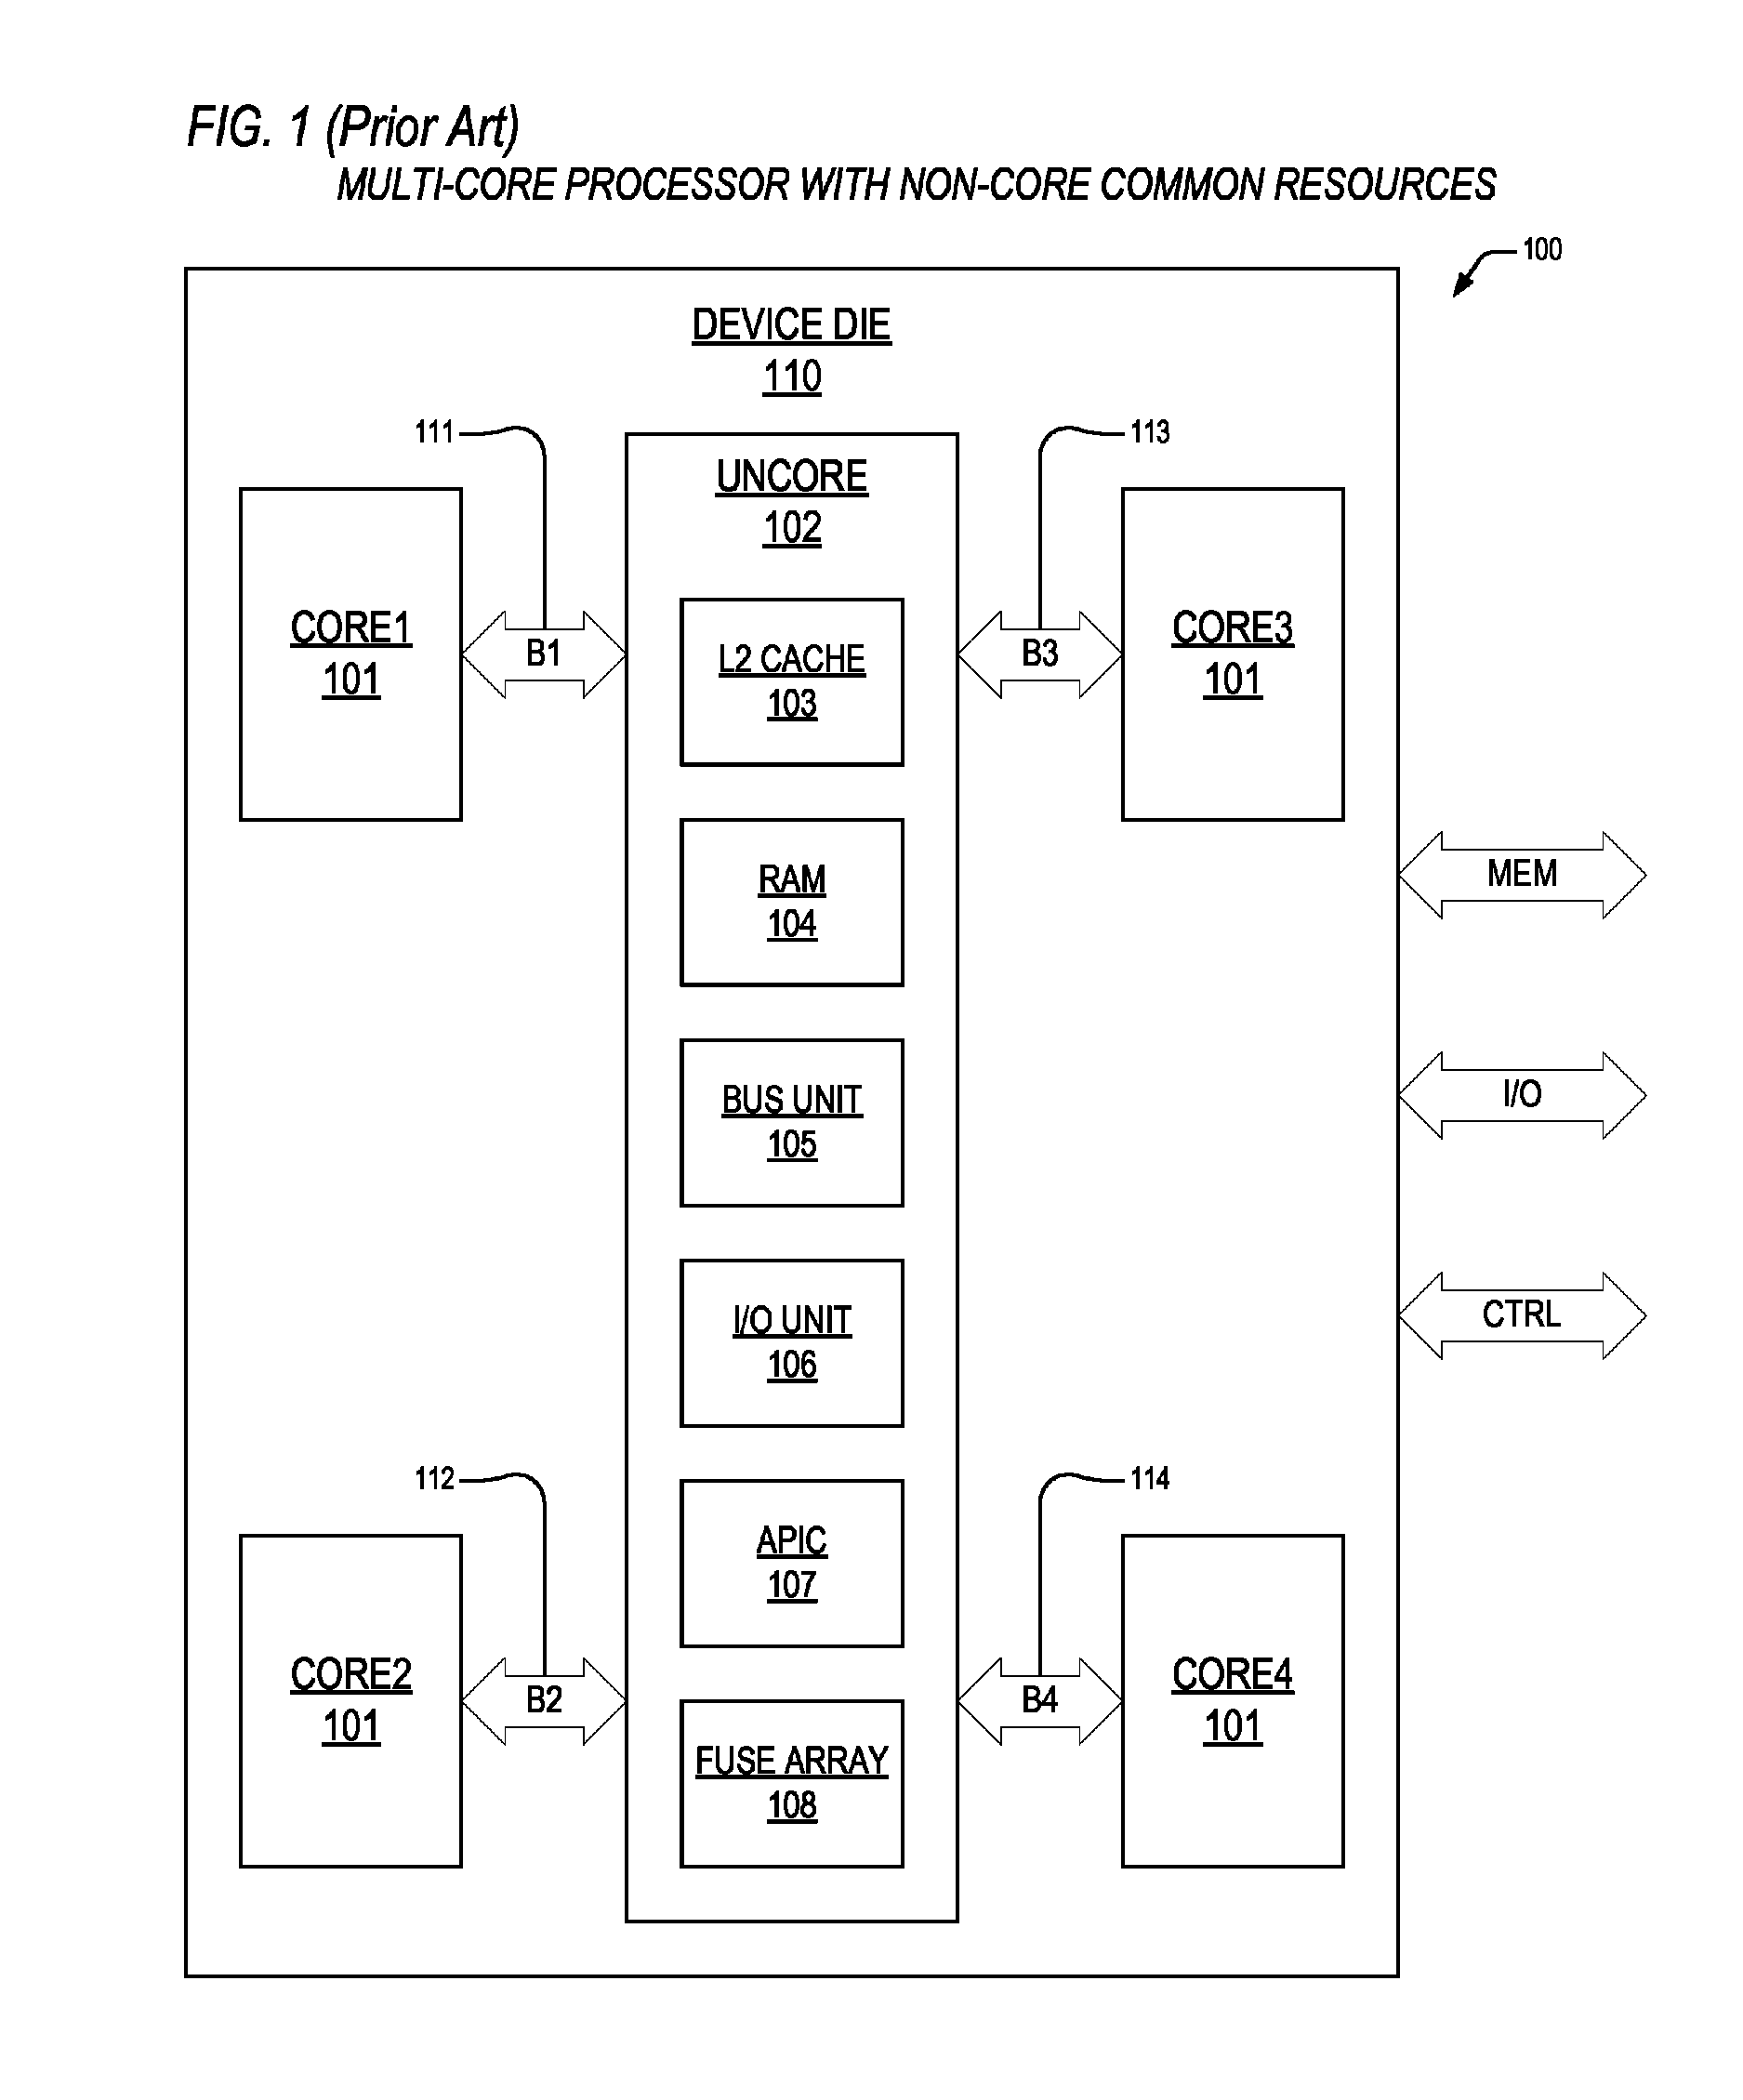 Apparatus and method to preclude load replays dependent on write combining memory space access in an out-of-order processor